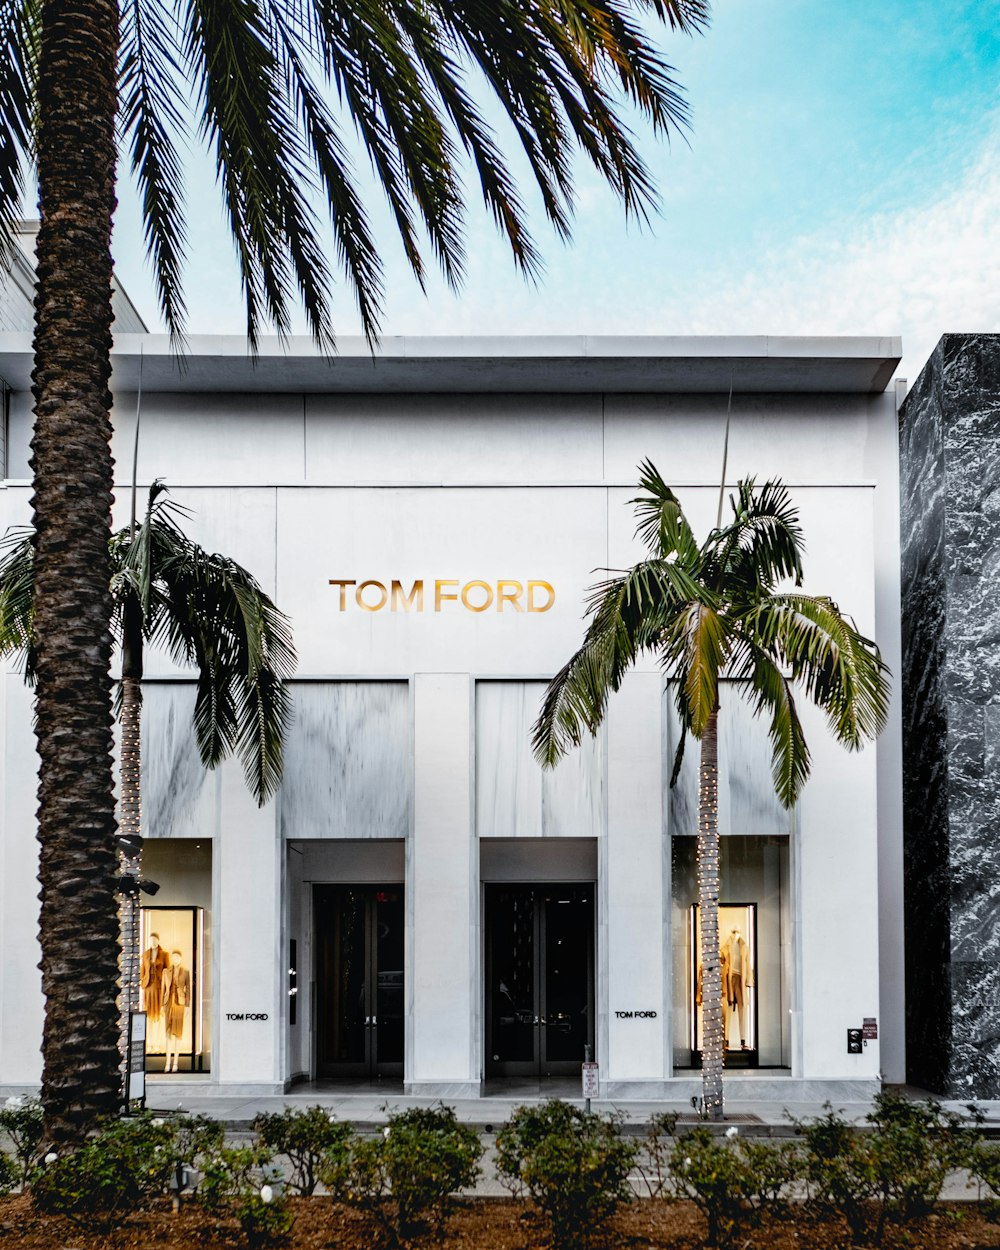 Tom Ford building at daytime